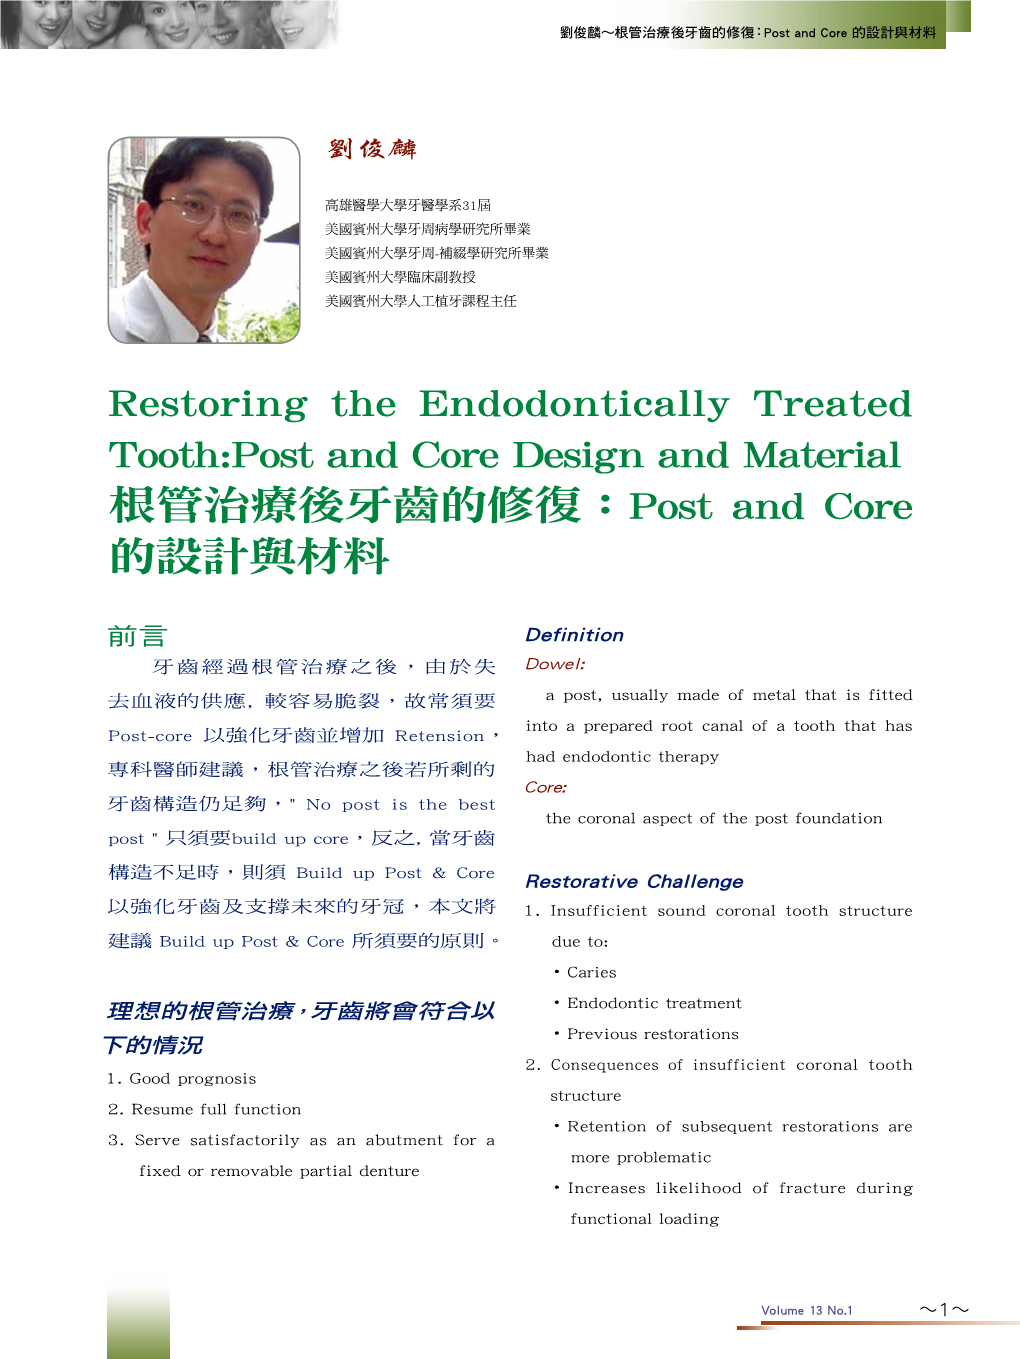 Restoring the Endodontically Treated Tooth:Post and Core Design and Material 根管治療後牙齒的修復：Post and Core 的設計與材料